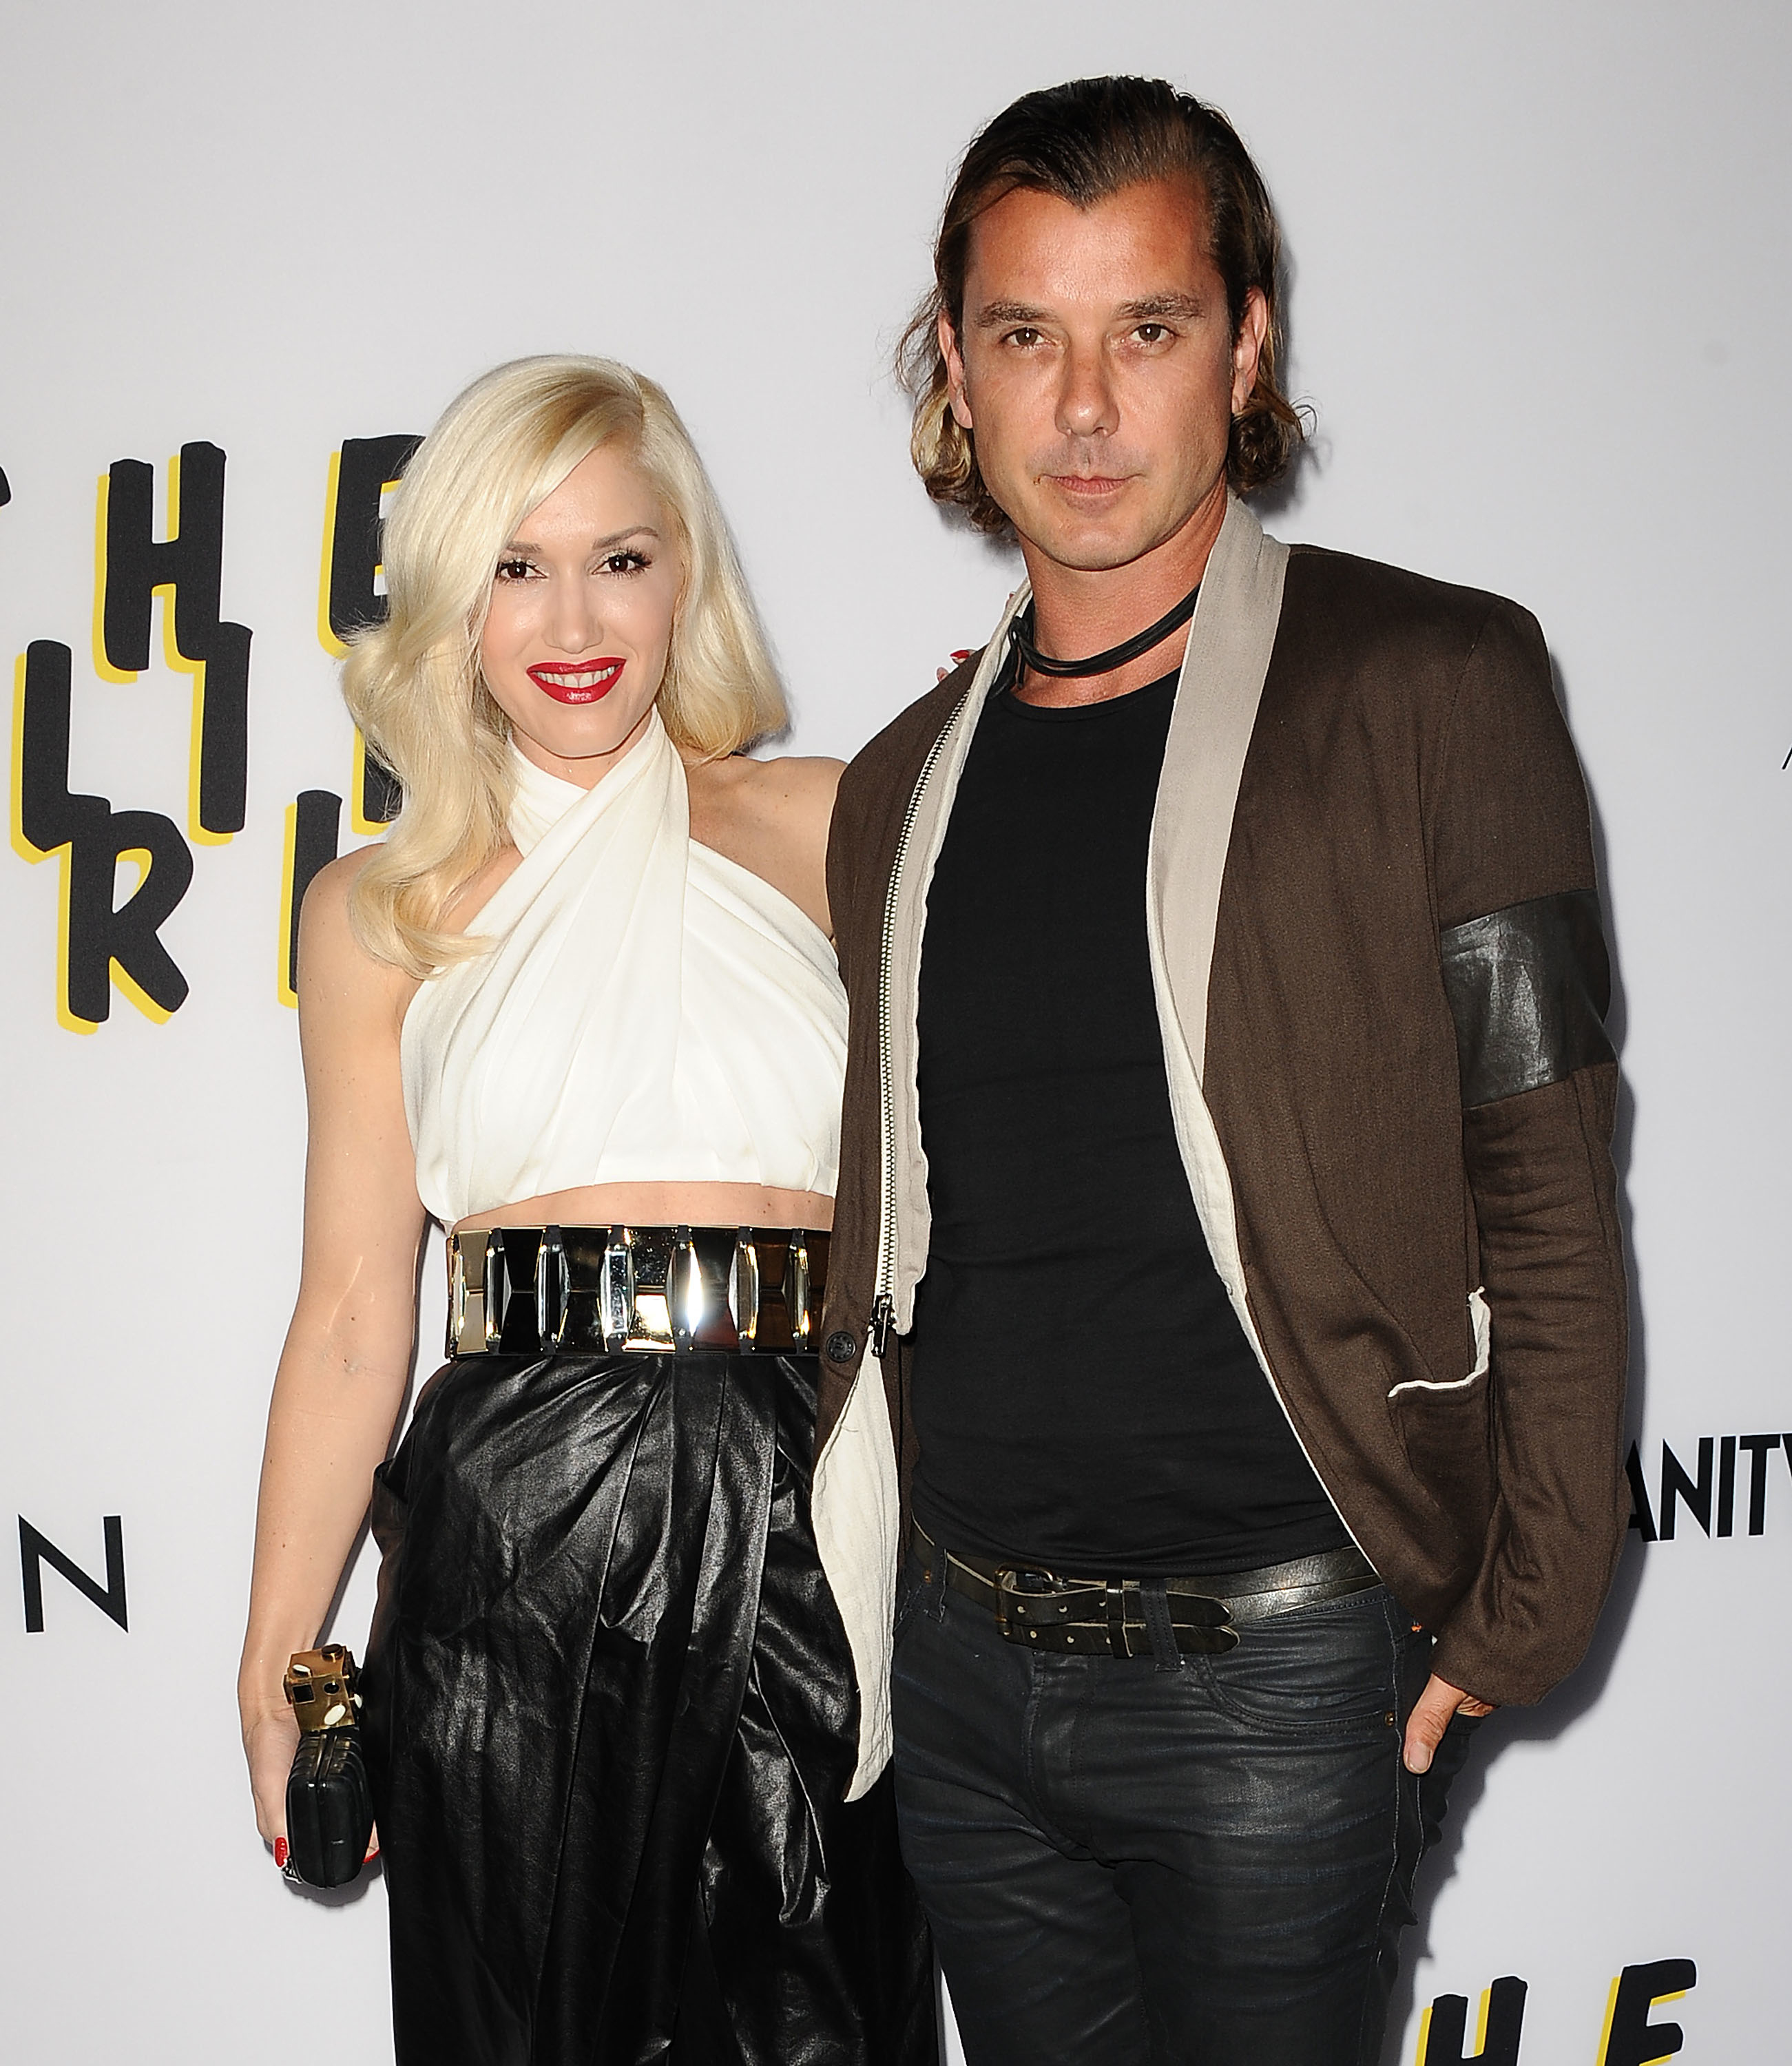 Gwen Stefani and Gavin Rossdale pose together; Stefani in a white top and black skirt, Rossdale in a brown jacket and black shirt